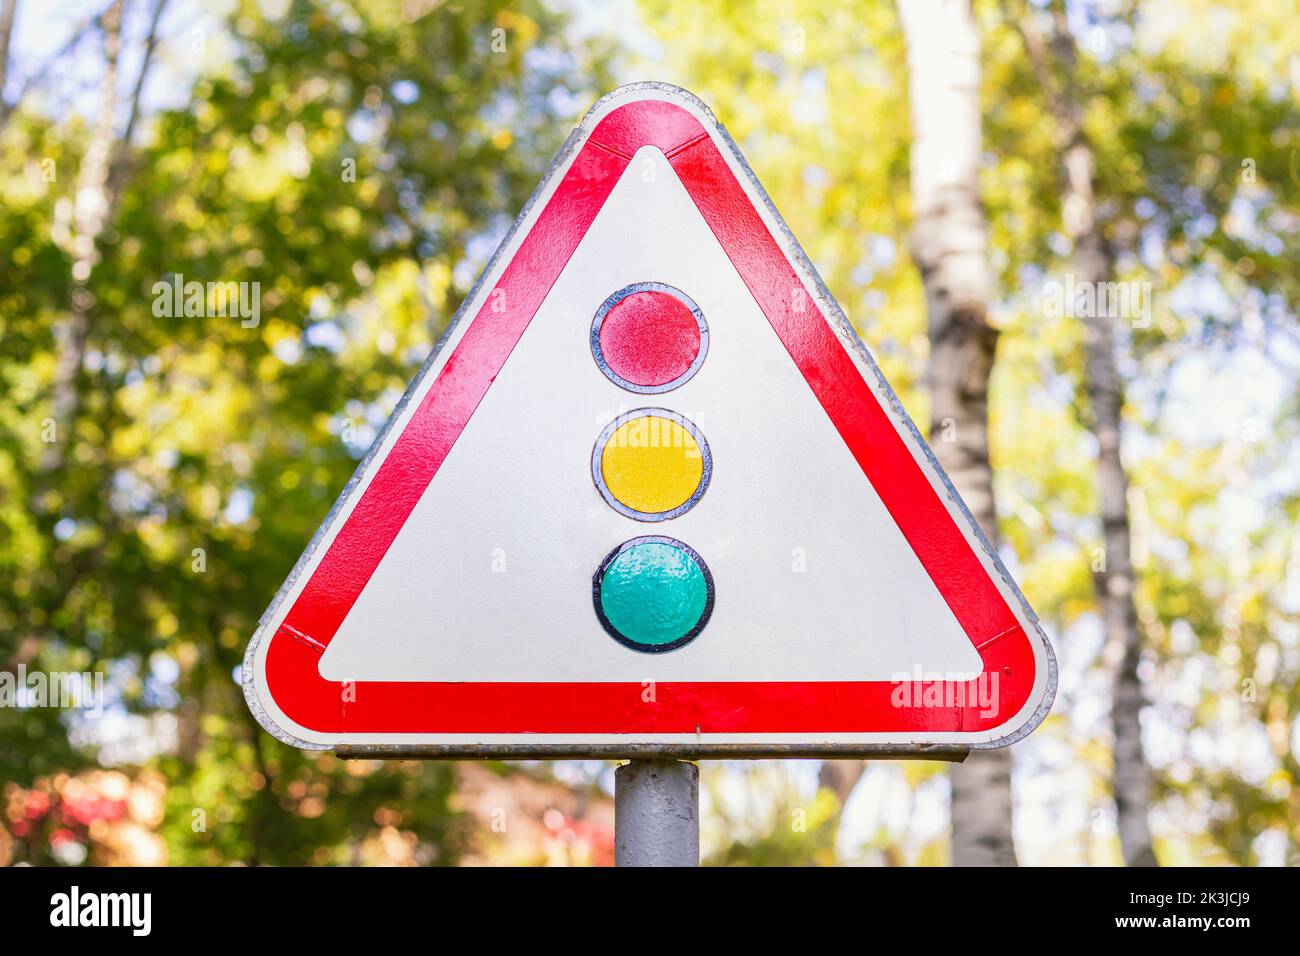 Road sign warning about traffic light regulation of the European standard.German road sign: traffic signals.Traffic signals ahead.Signs giving warning Stock Photo